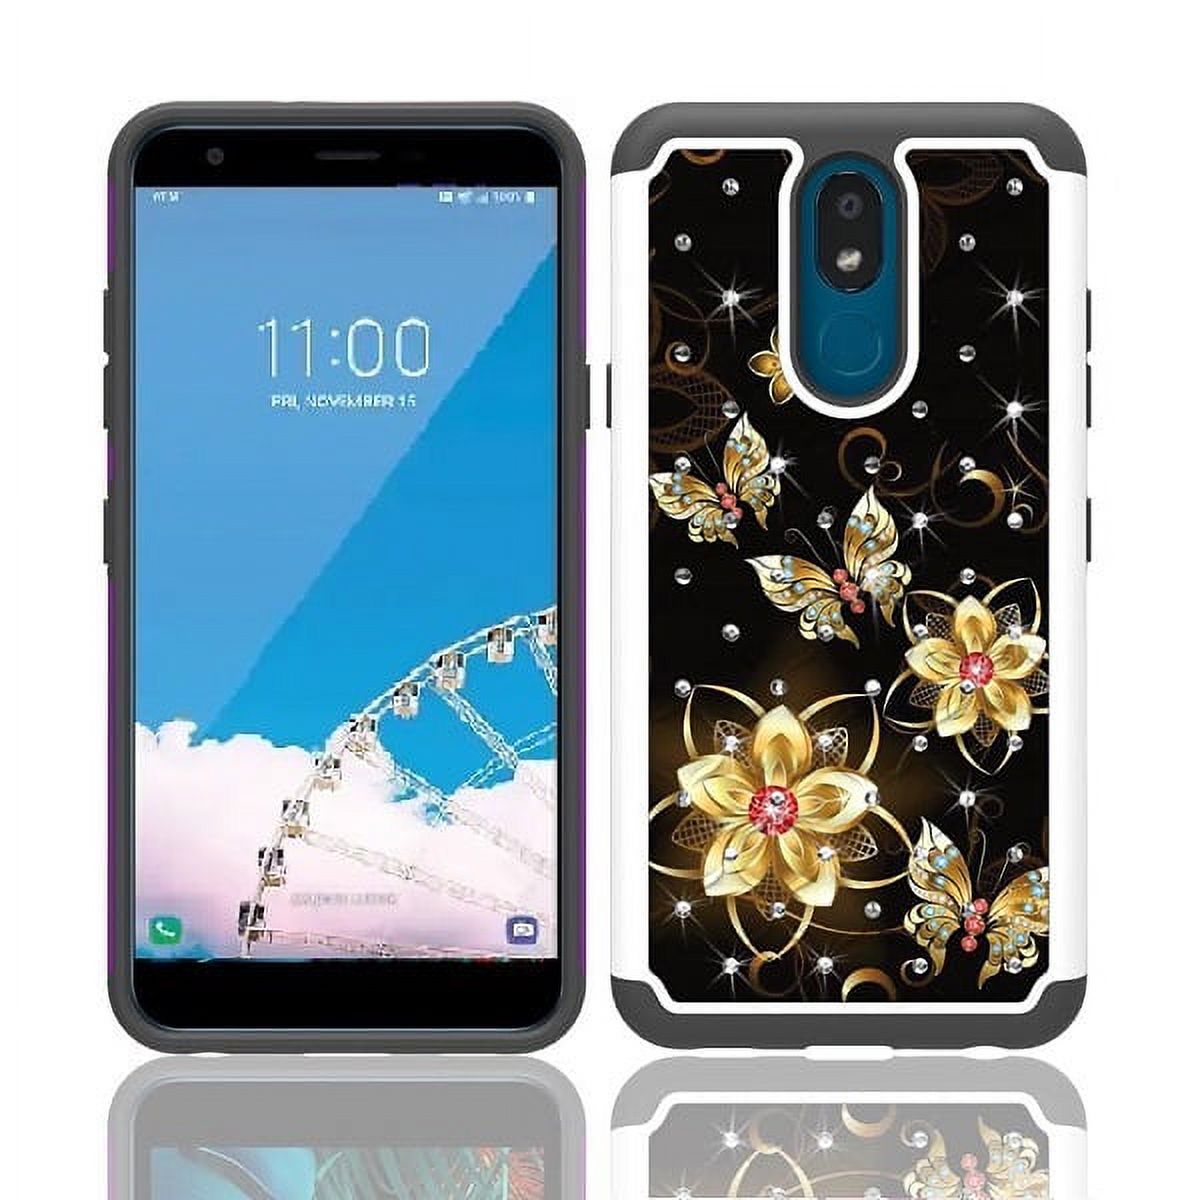 Phone Case for LG Prime 2/ LG Aristo 4 Plus / Straight Talk LG Journey Smartphone / LG Journey /LG Arena 2 / LG Escape Plus, Crystal Bling Shock-Resistant Case (Black Gold Butterfly- Tempered Glass) - image 2 of 4